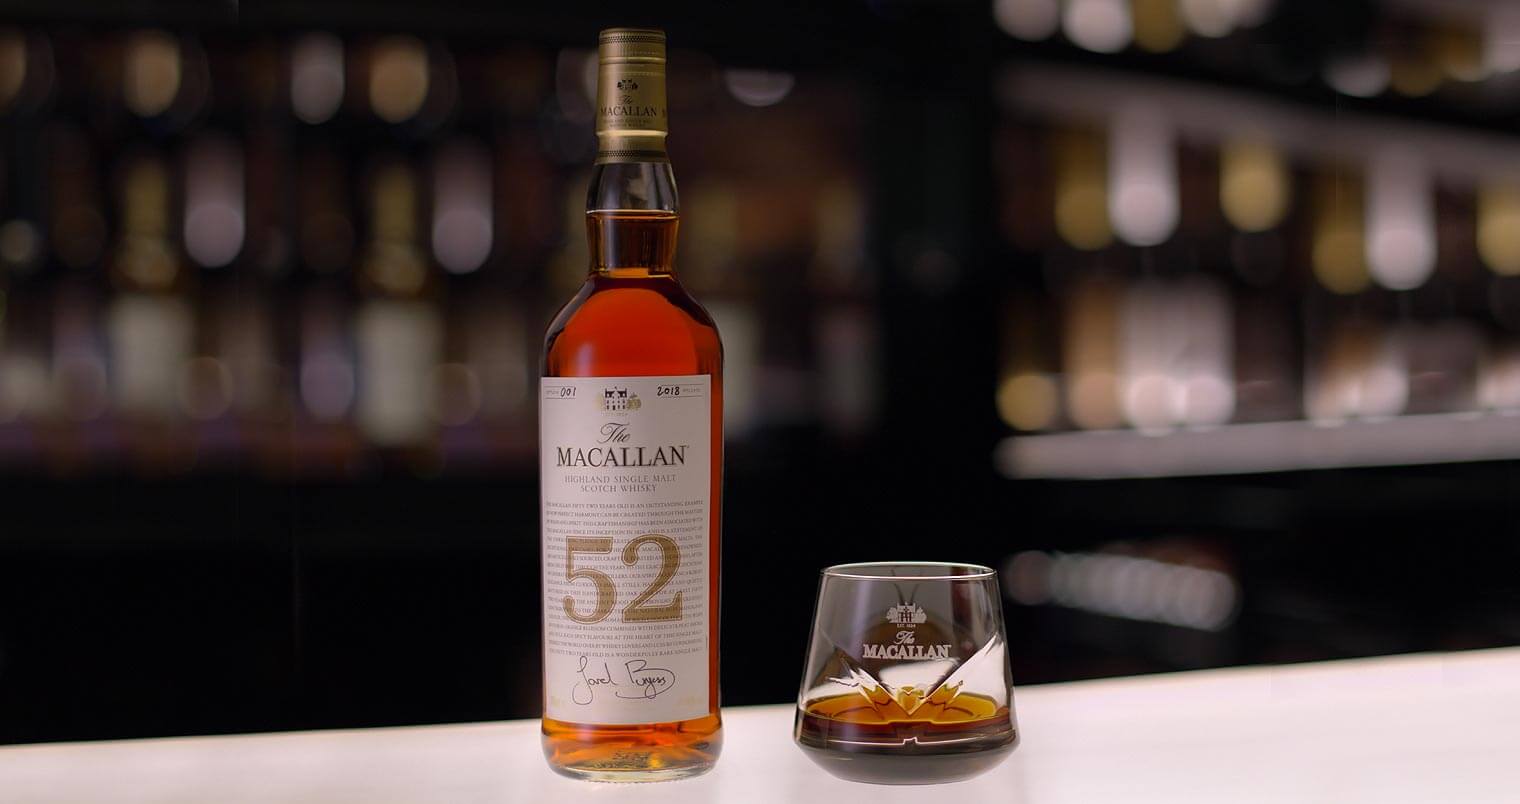 The Macallan 52 years old 2018, bottle and glass on bar table, featured image